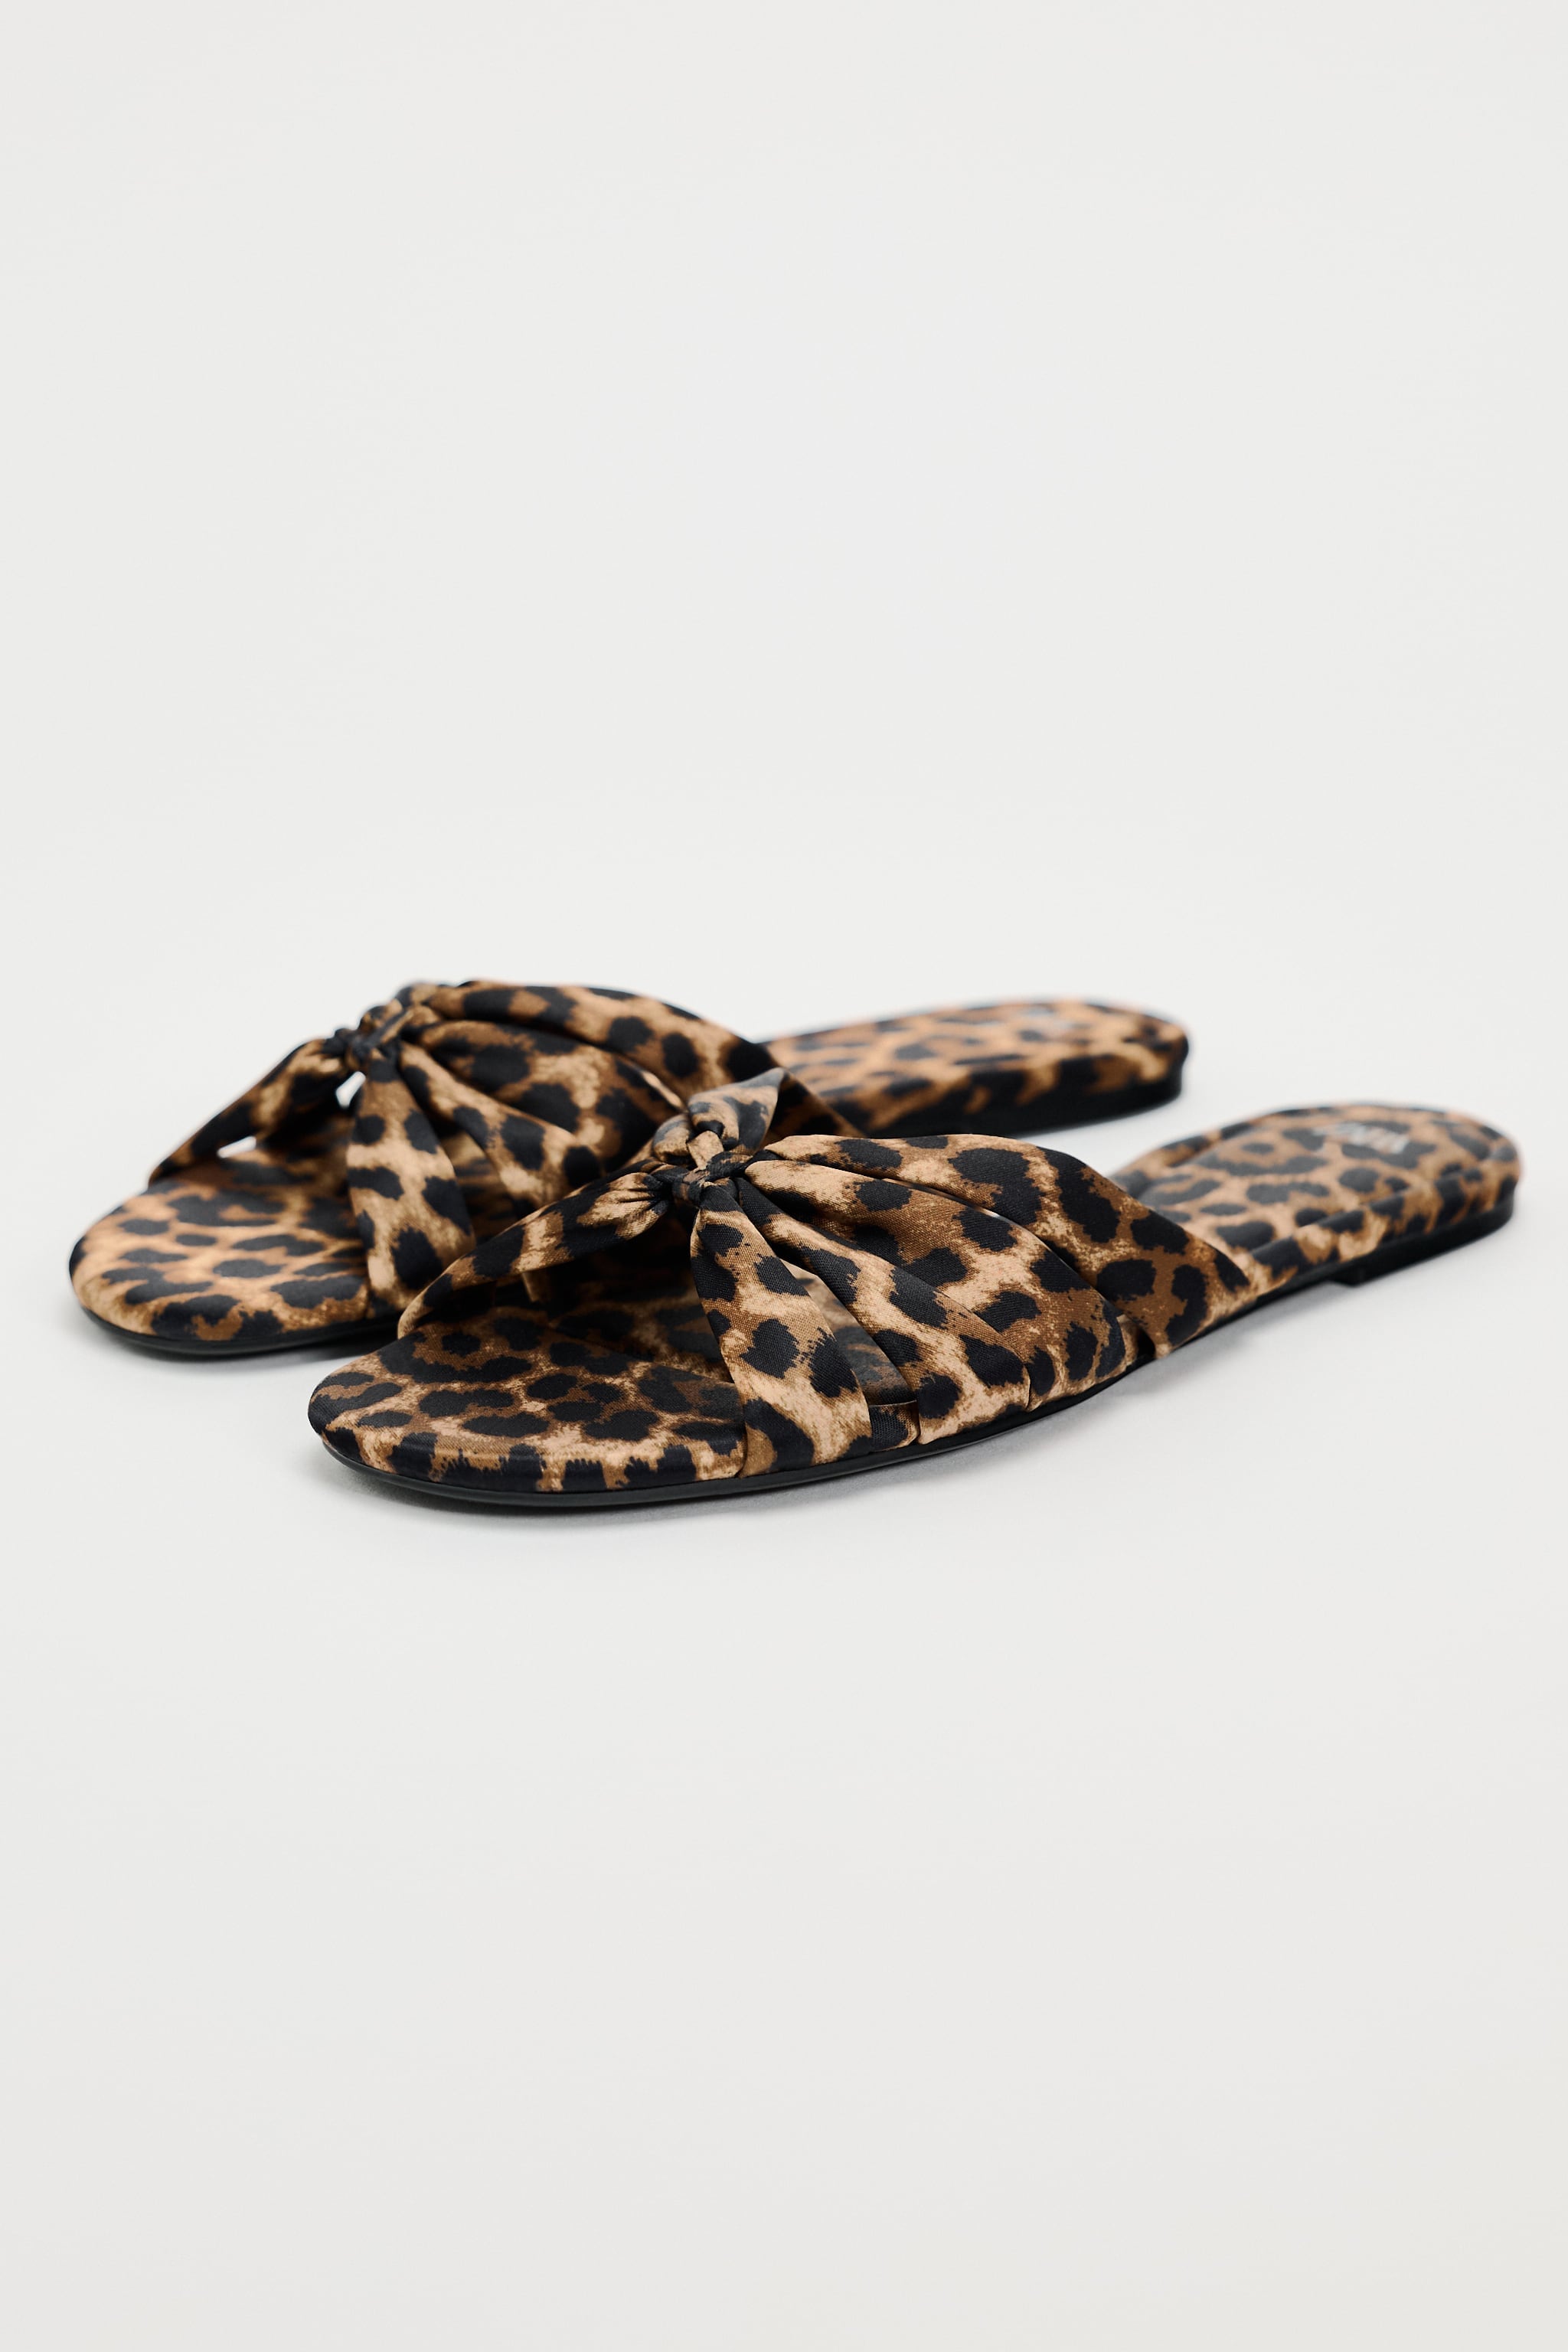 ANIMAL PRINT KNOTTED SANDALS